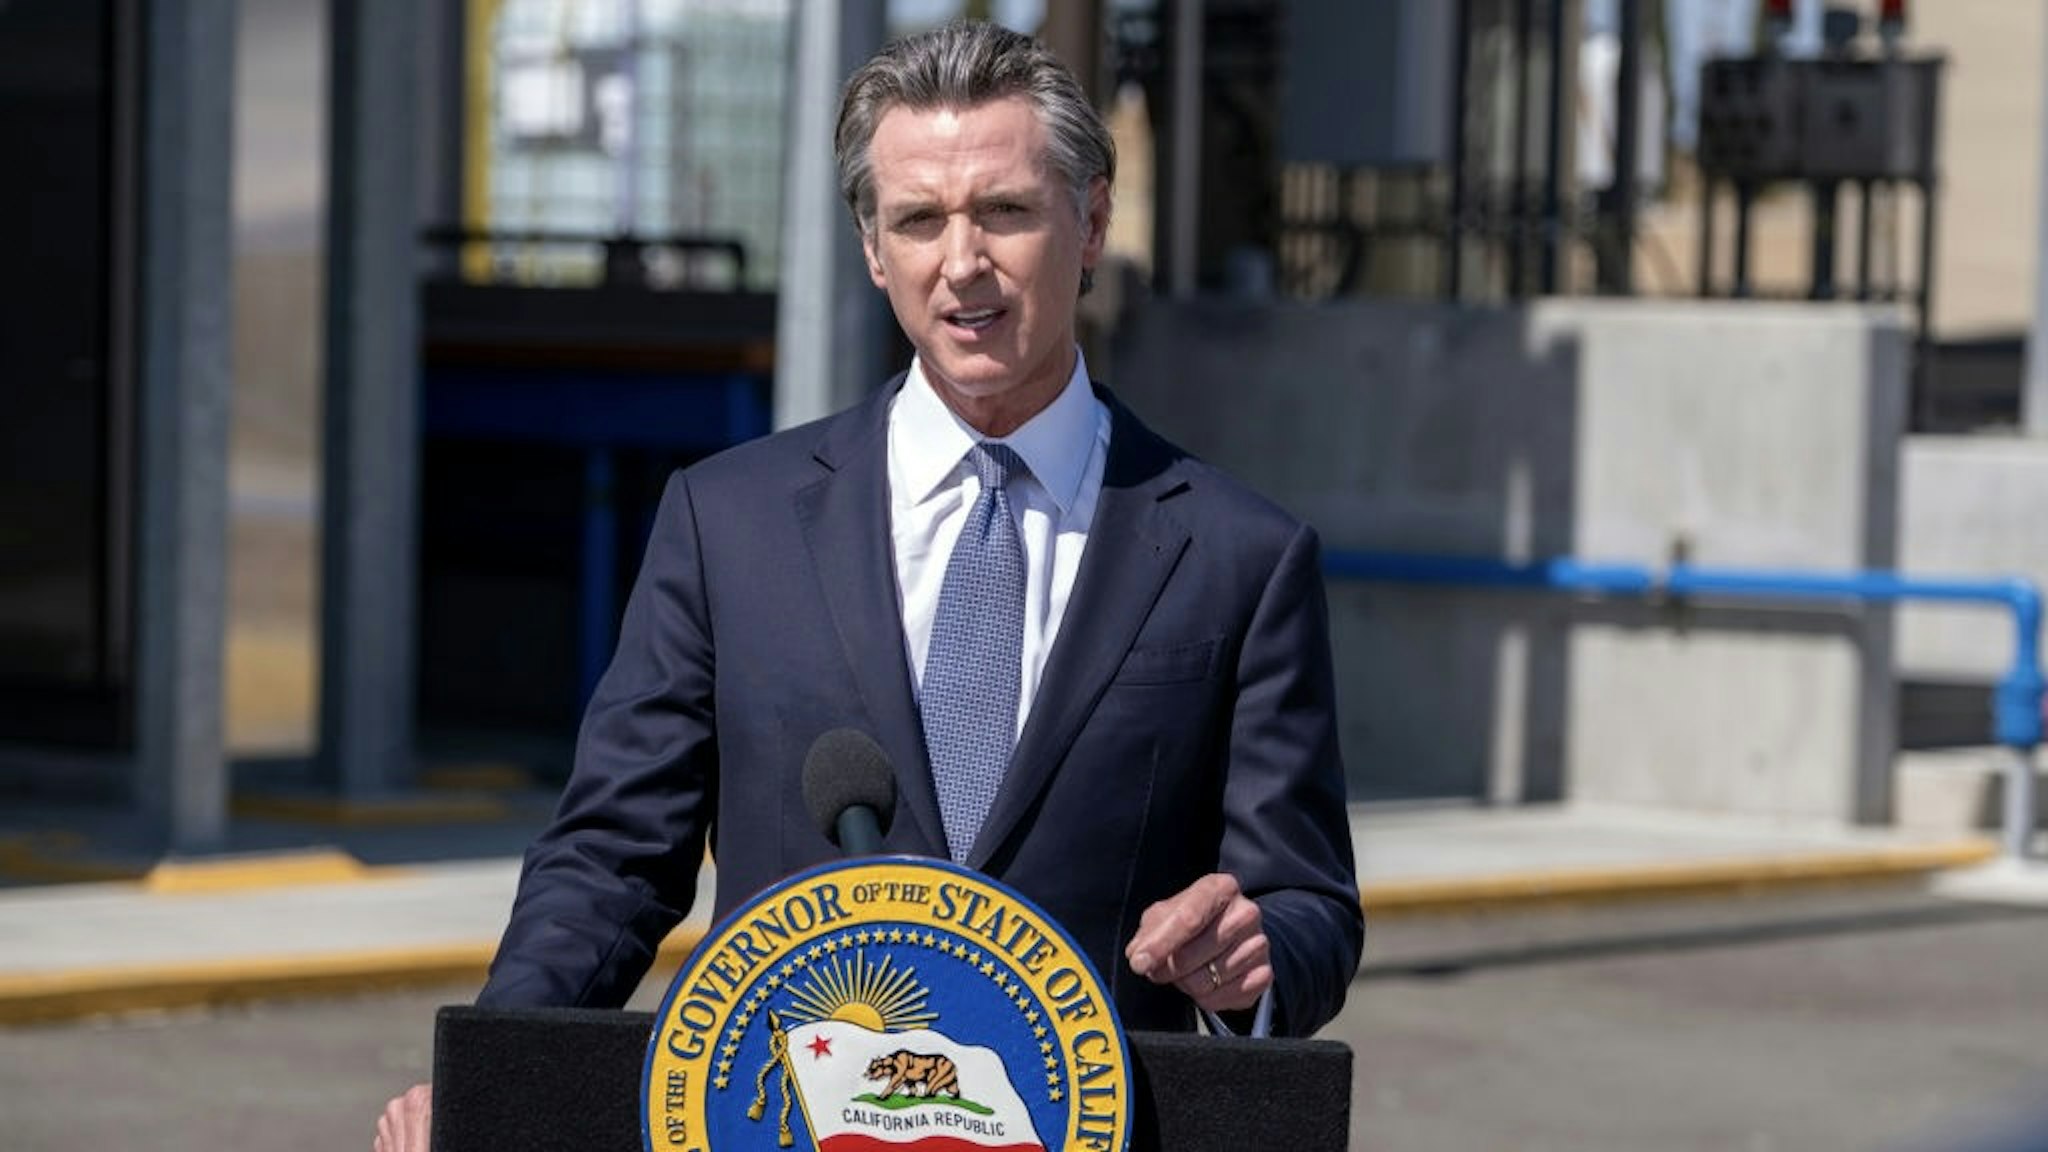 California Governor Gavin Newsom tours a water recycling demonstration facility Carson, CA - May 17: California Governor Gavin Newsom speaks to the media after a tour of a Metropolitan Water District water recycling demonstration facility in Carson, CA. Tuesday, May 17, 2022. (Photo by Hans Gutknecht/MediaNews Group/Los Angeles Daily News via Getty Images) MediaNews Group/Los Angeles Daily News via Getty Images / Contributor